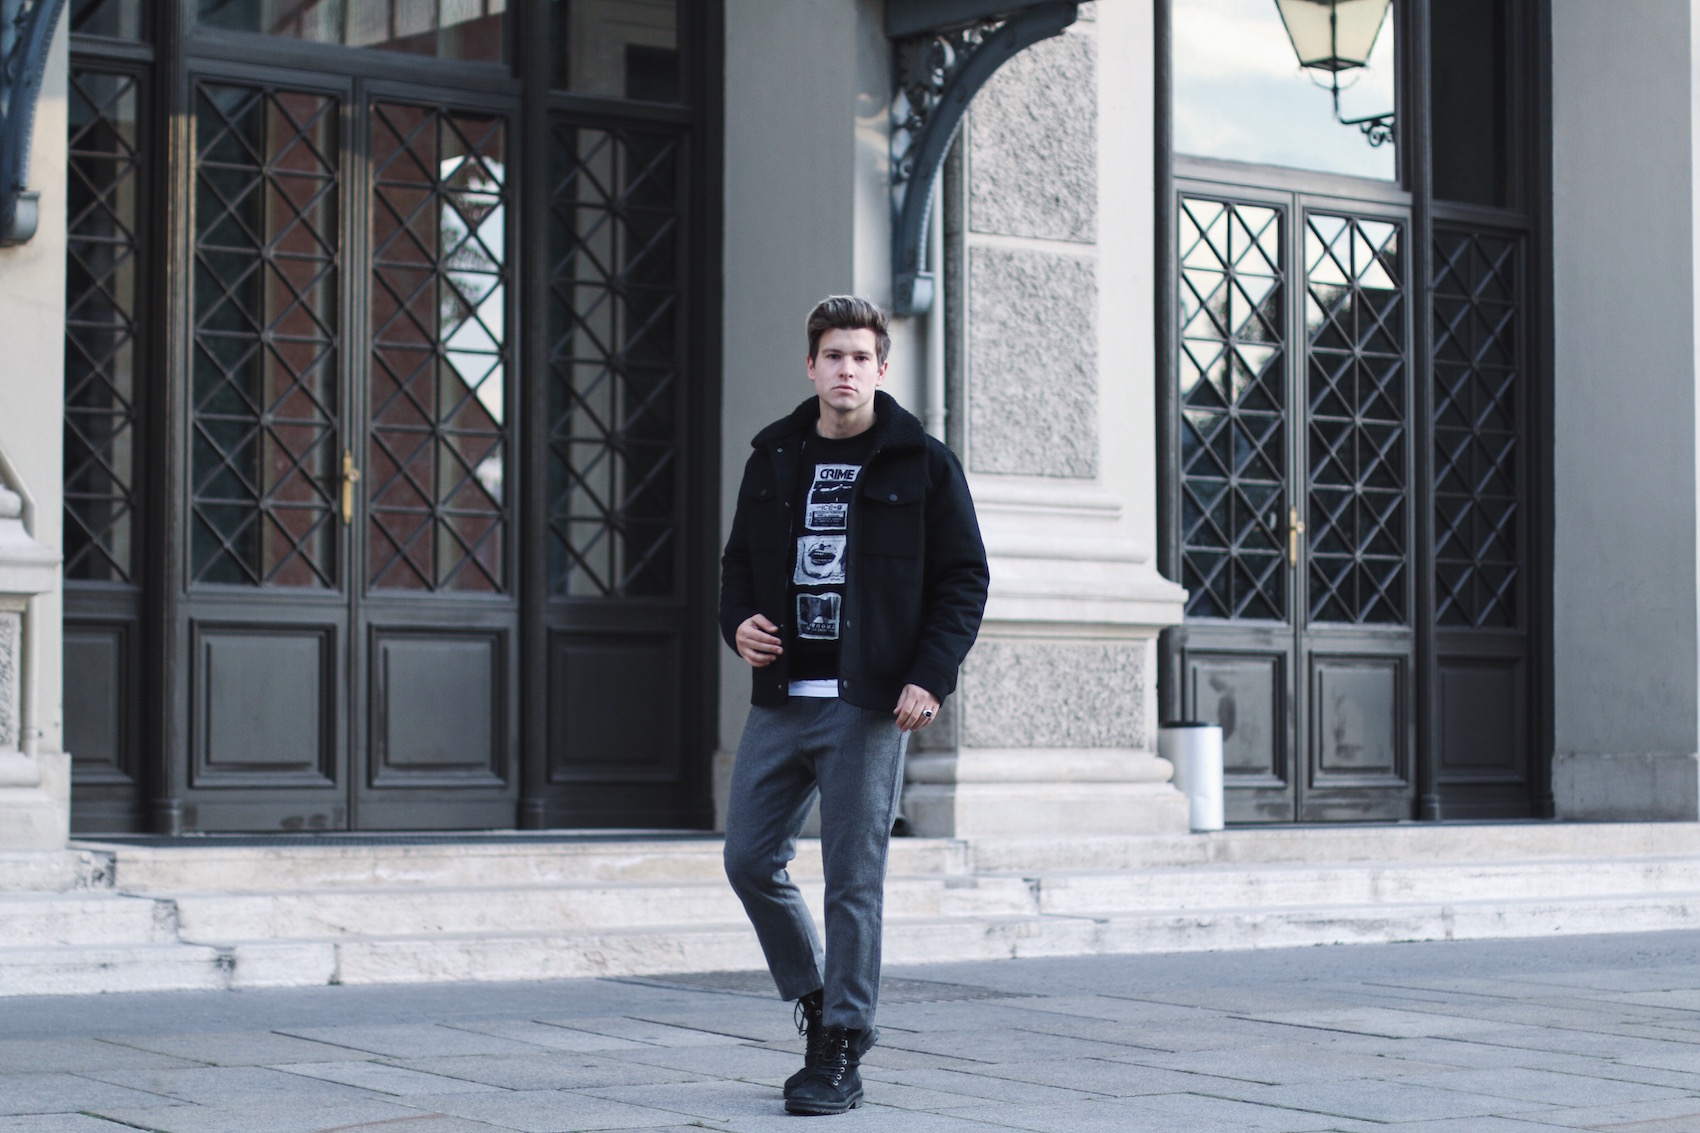 Weekday Jeans Winter Outfit_Streetstyle Herrenmode_Meanwhile in Awesometown_Männnerblog_Menswear_Lifestyleblog_Maleblogger_Maleinfluencer7